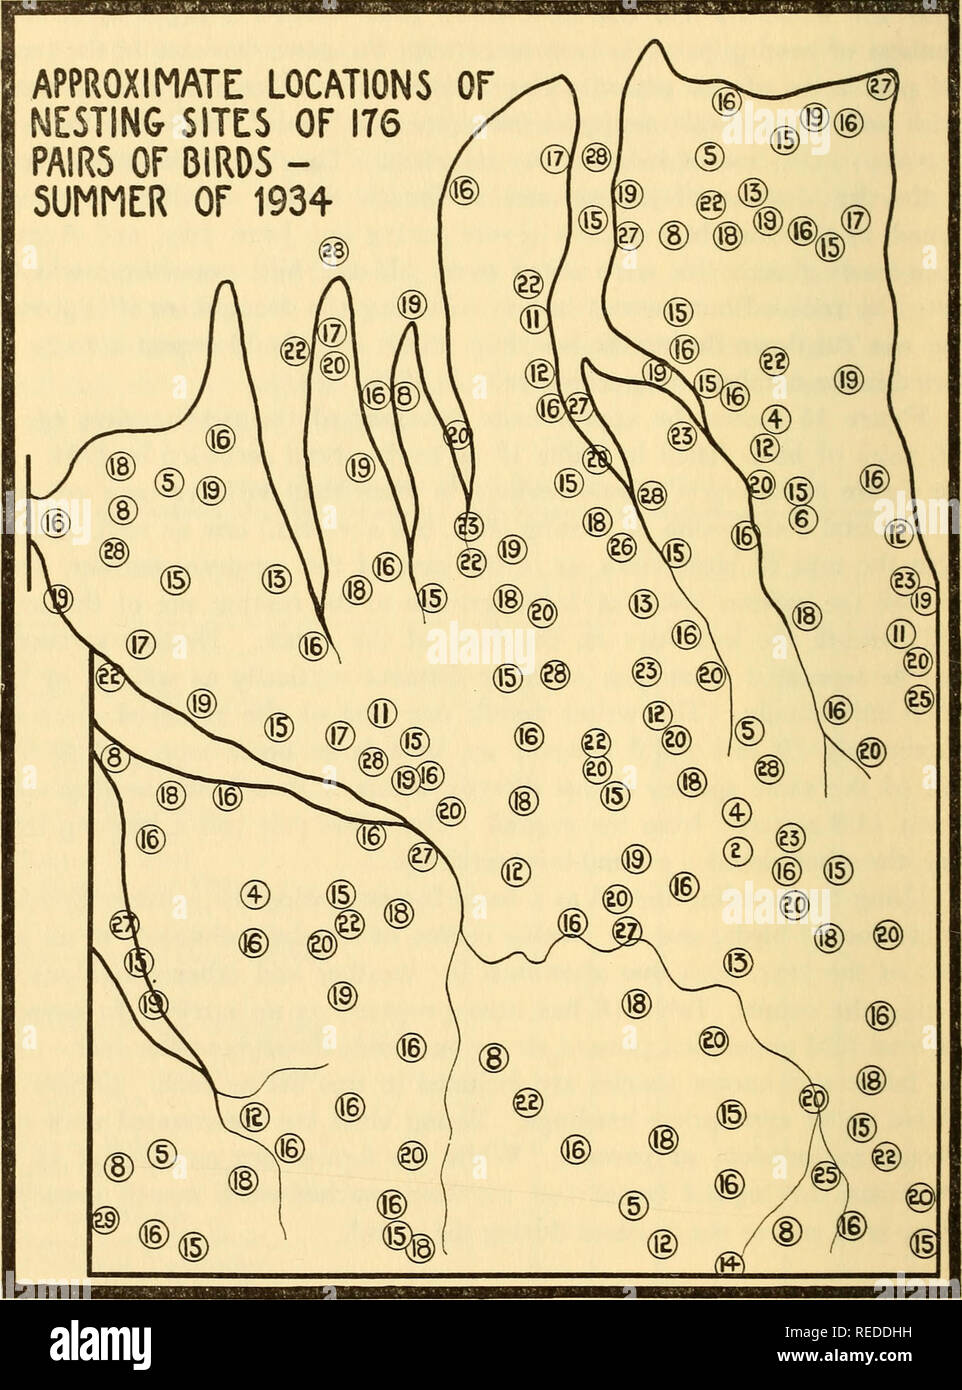 . The composition and dynamics of a beech maple climax community. Forest ecology; Forest dynamics; Natural history. 64 The Cleveland Museum of Natural History Sci. Pub. Vol. VI. Fig. 15. Approximate locations of nesting sites of breeding birds in Table 17, summer of 1934. 2—Barred owl A—Hairy woodpecker 5—Downy woodpecker 6—Crested flycatcher 8—Wood pewee 11—Chickadee 12—Tufted titmouse 13—White-breasted nuthatch 14—Robin 20—Redstart 15—Wood thrush 22—Scarlet tanager 16—Red-eyed vireo 23—Cardinal 17—Black-throated green 25—Towhee warbler 26—Cerulean warbler 18—Oven-bird 27—Acadian flycatcher 1 Stock Photo